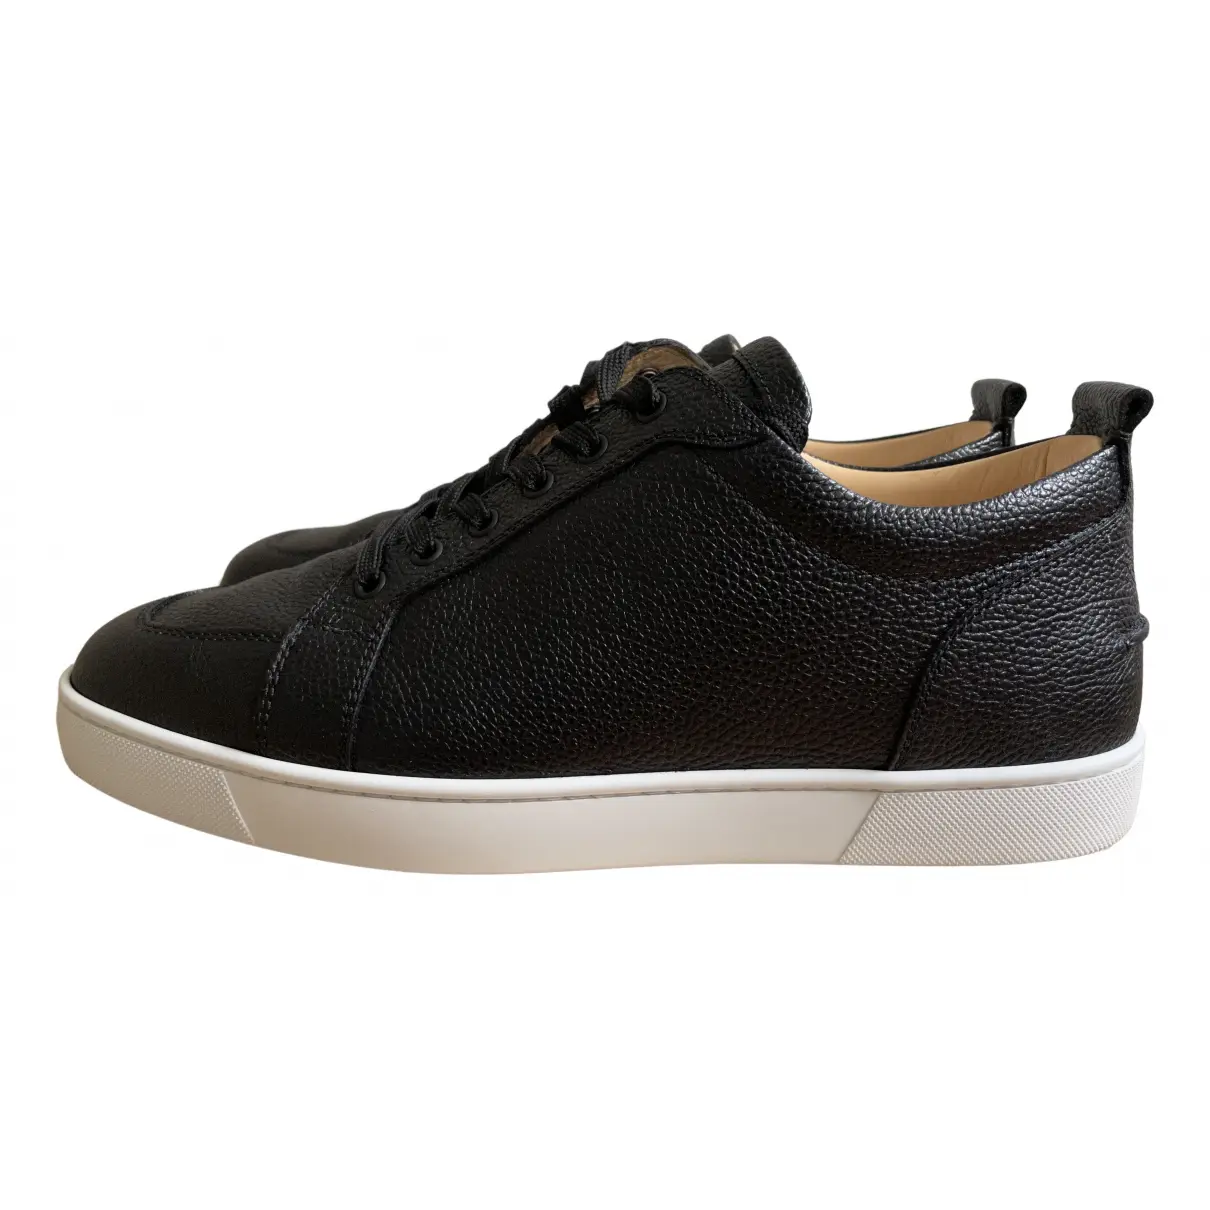 Rantulow leather low trainers Christian Louboutin